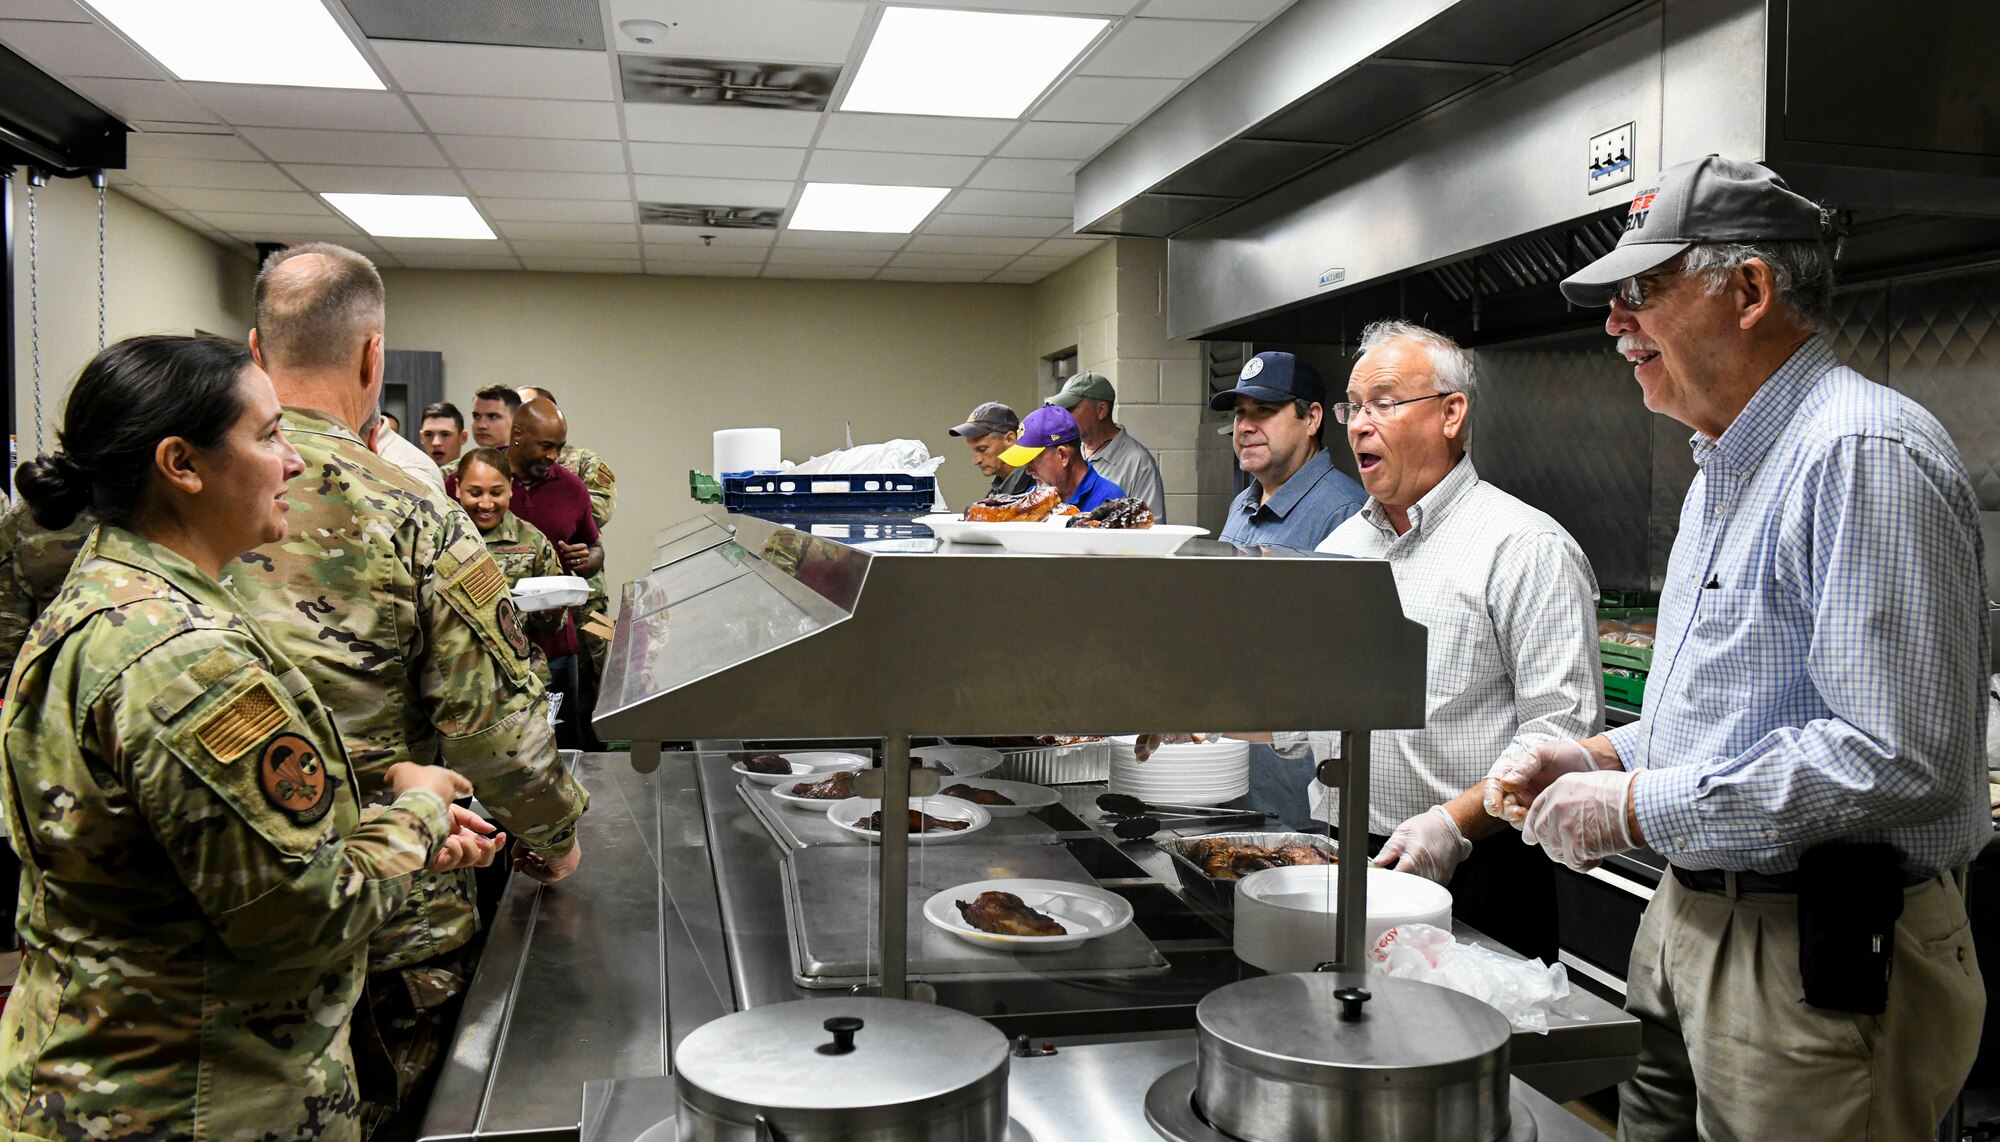 Former and present commanders and command chief master sergeants of the 172nd Airlift Wing gathered to serve lunch to Airmen and full-time staff at the Wing’s dining facility on April 6, 2022. (U.S. Air National Guard photo by 1st Lt. Kiara Spann)